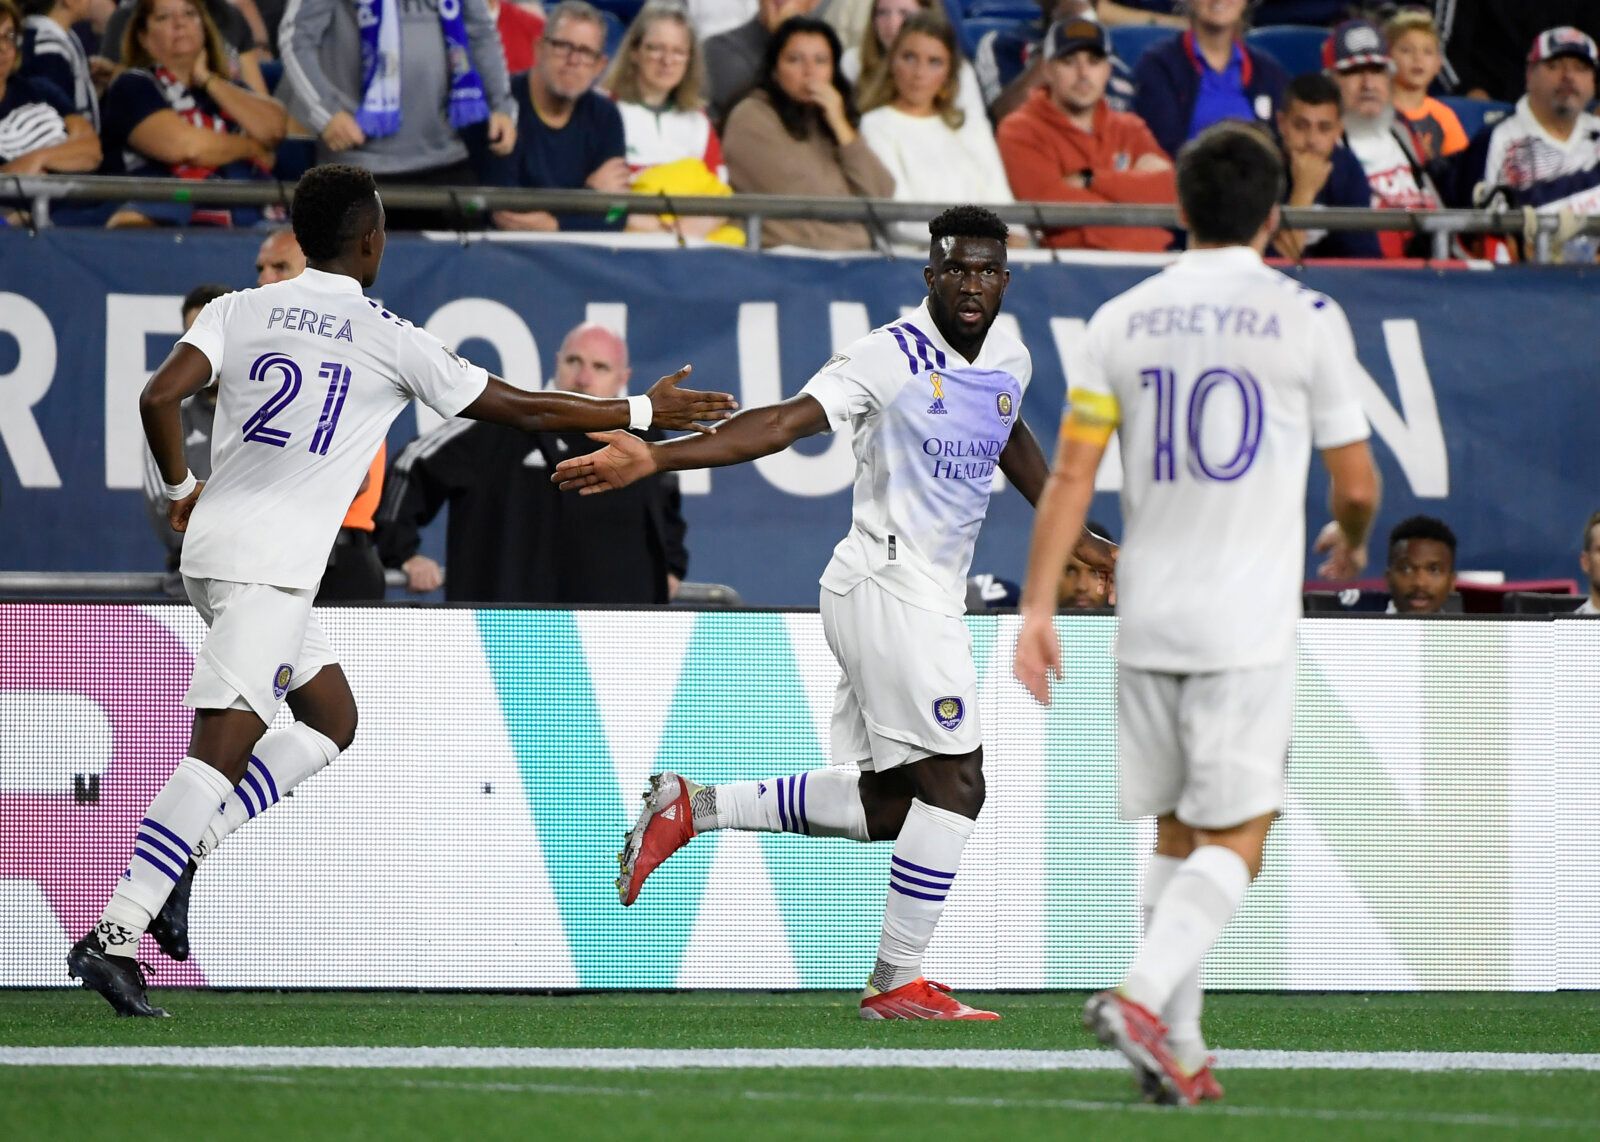 Sep 25, 2021; Foxborough, Massachusetts, USA; Orlando City SC forward Daryl Dike (18) celebrates with midfielder Andres Perea (21) after scoring a goal against the New England Revolution during the first half at Gillette Stadium. Mandatory Credit: Bob DeChiara-USA TODAY Sports